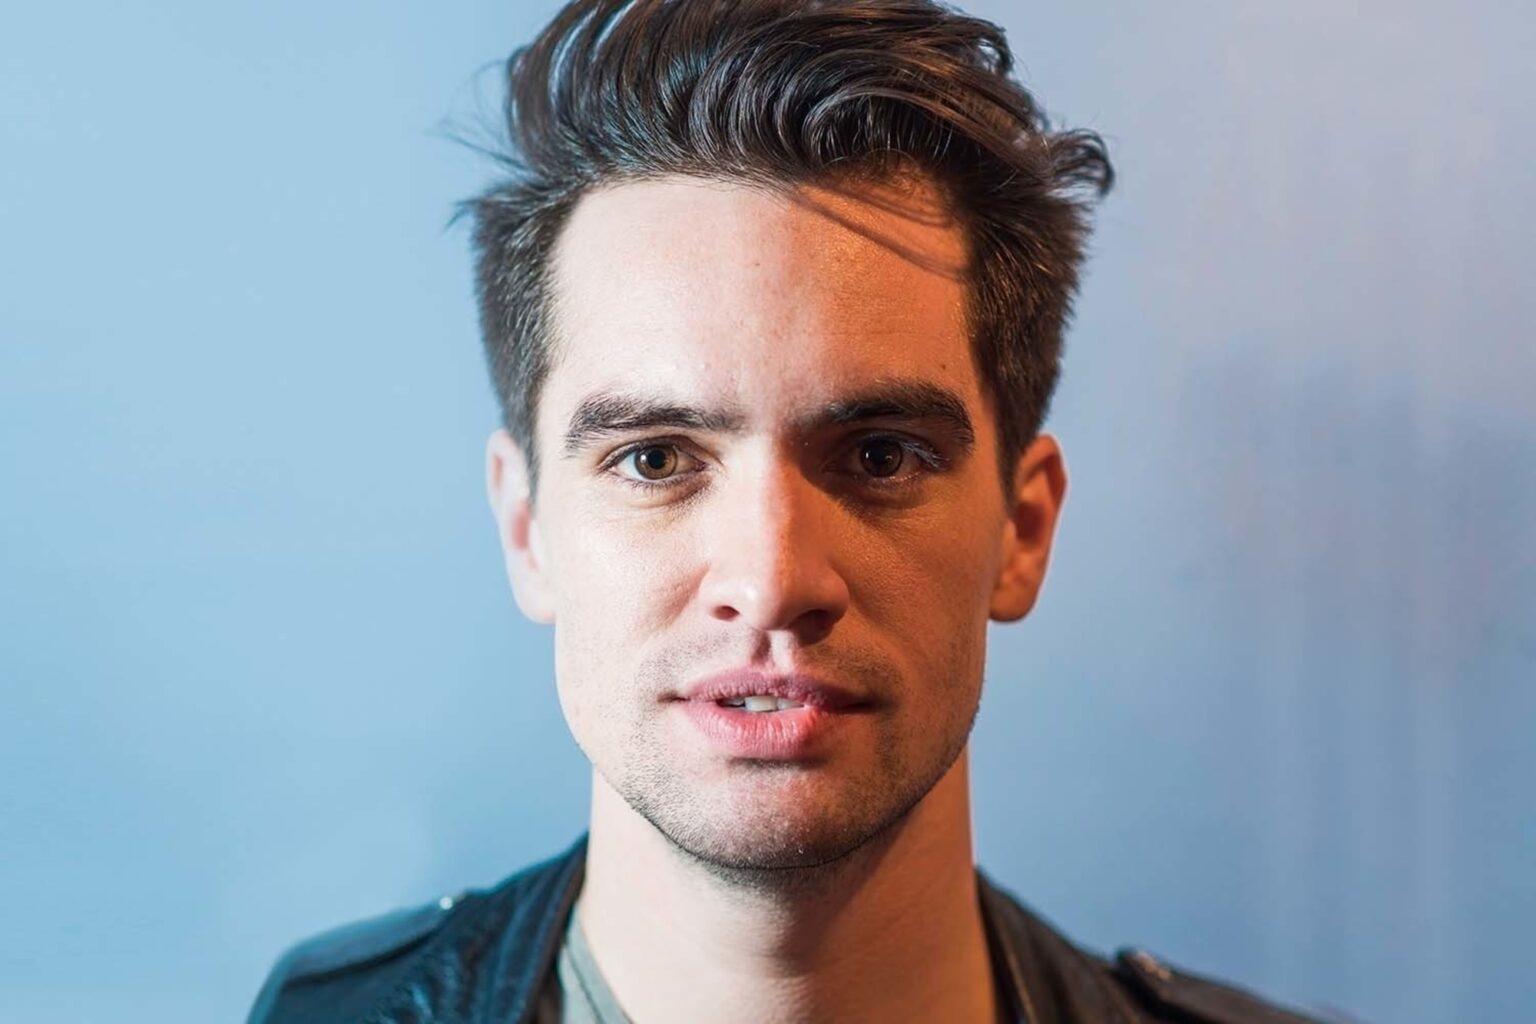 Brendon Urie & his wife Sarah Urie are officially the new face of all things 2021 & beyond. Find out why with these hilarious memes.